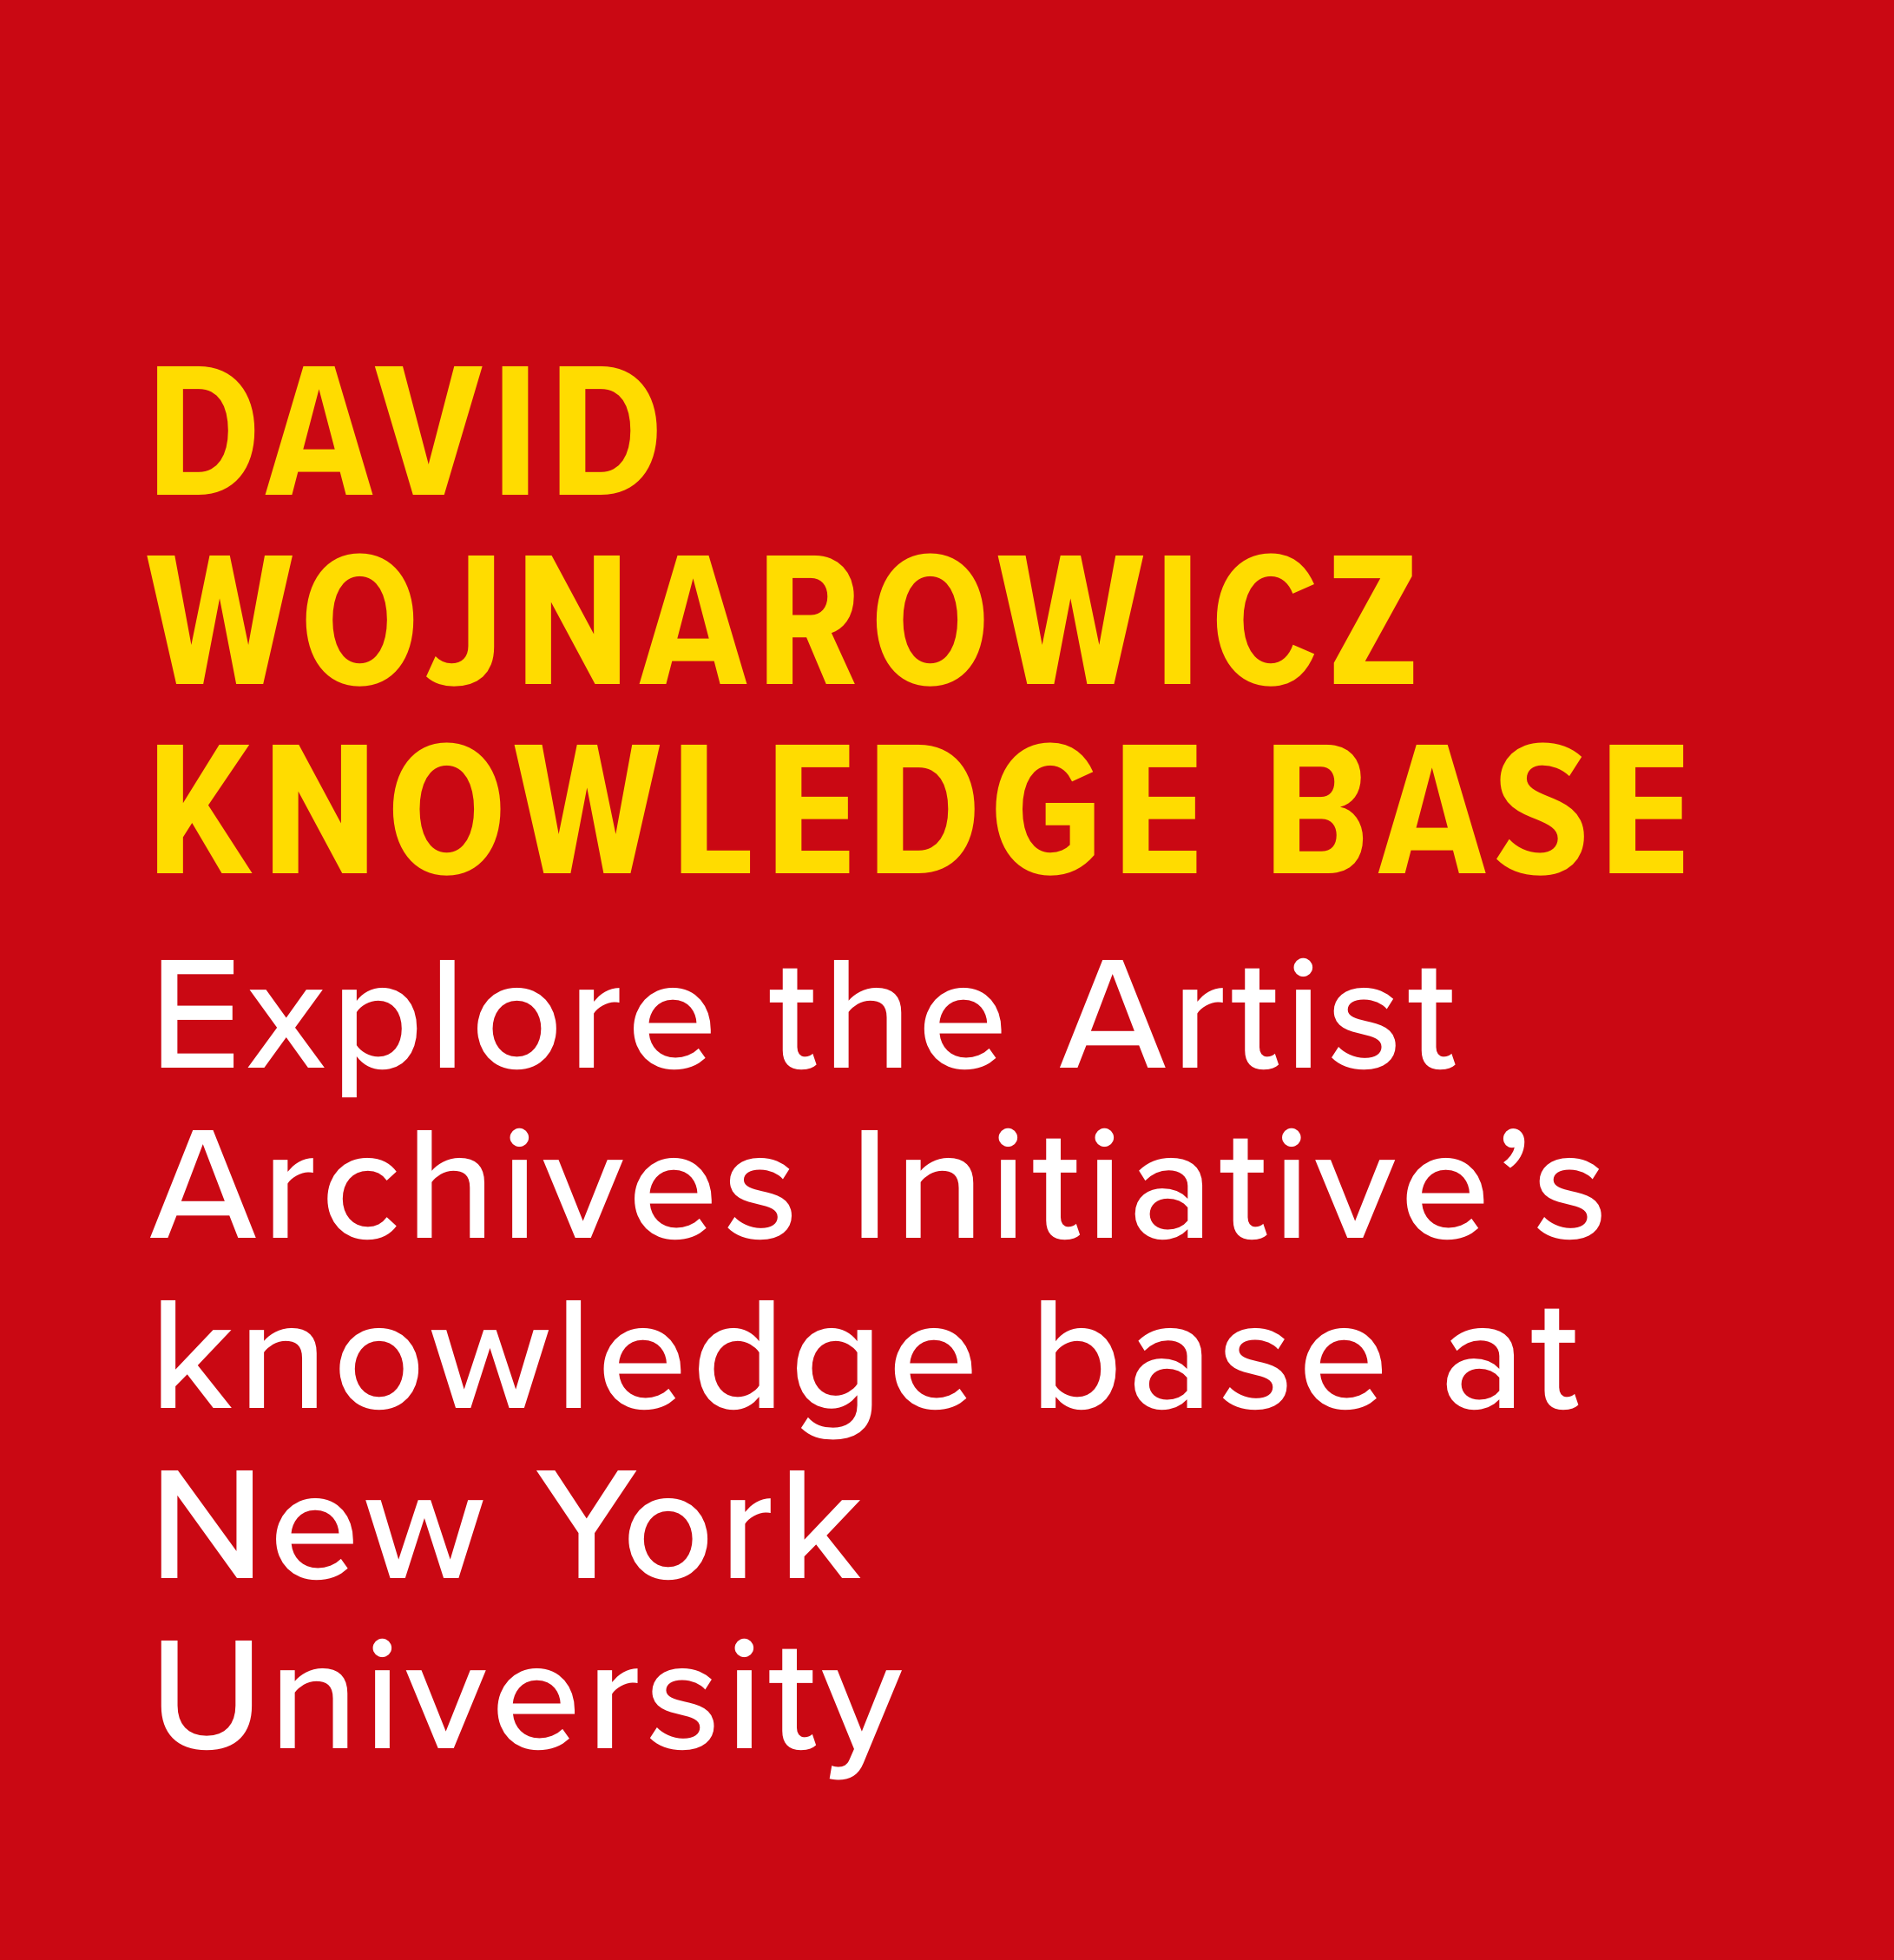 Explore the Artist Archives Initiative’s knowledge base at New York University